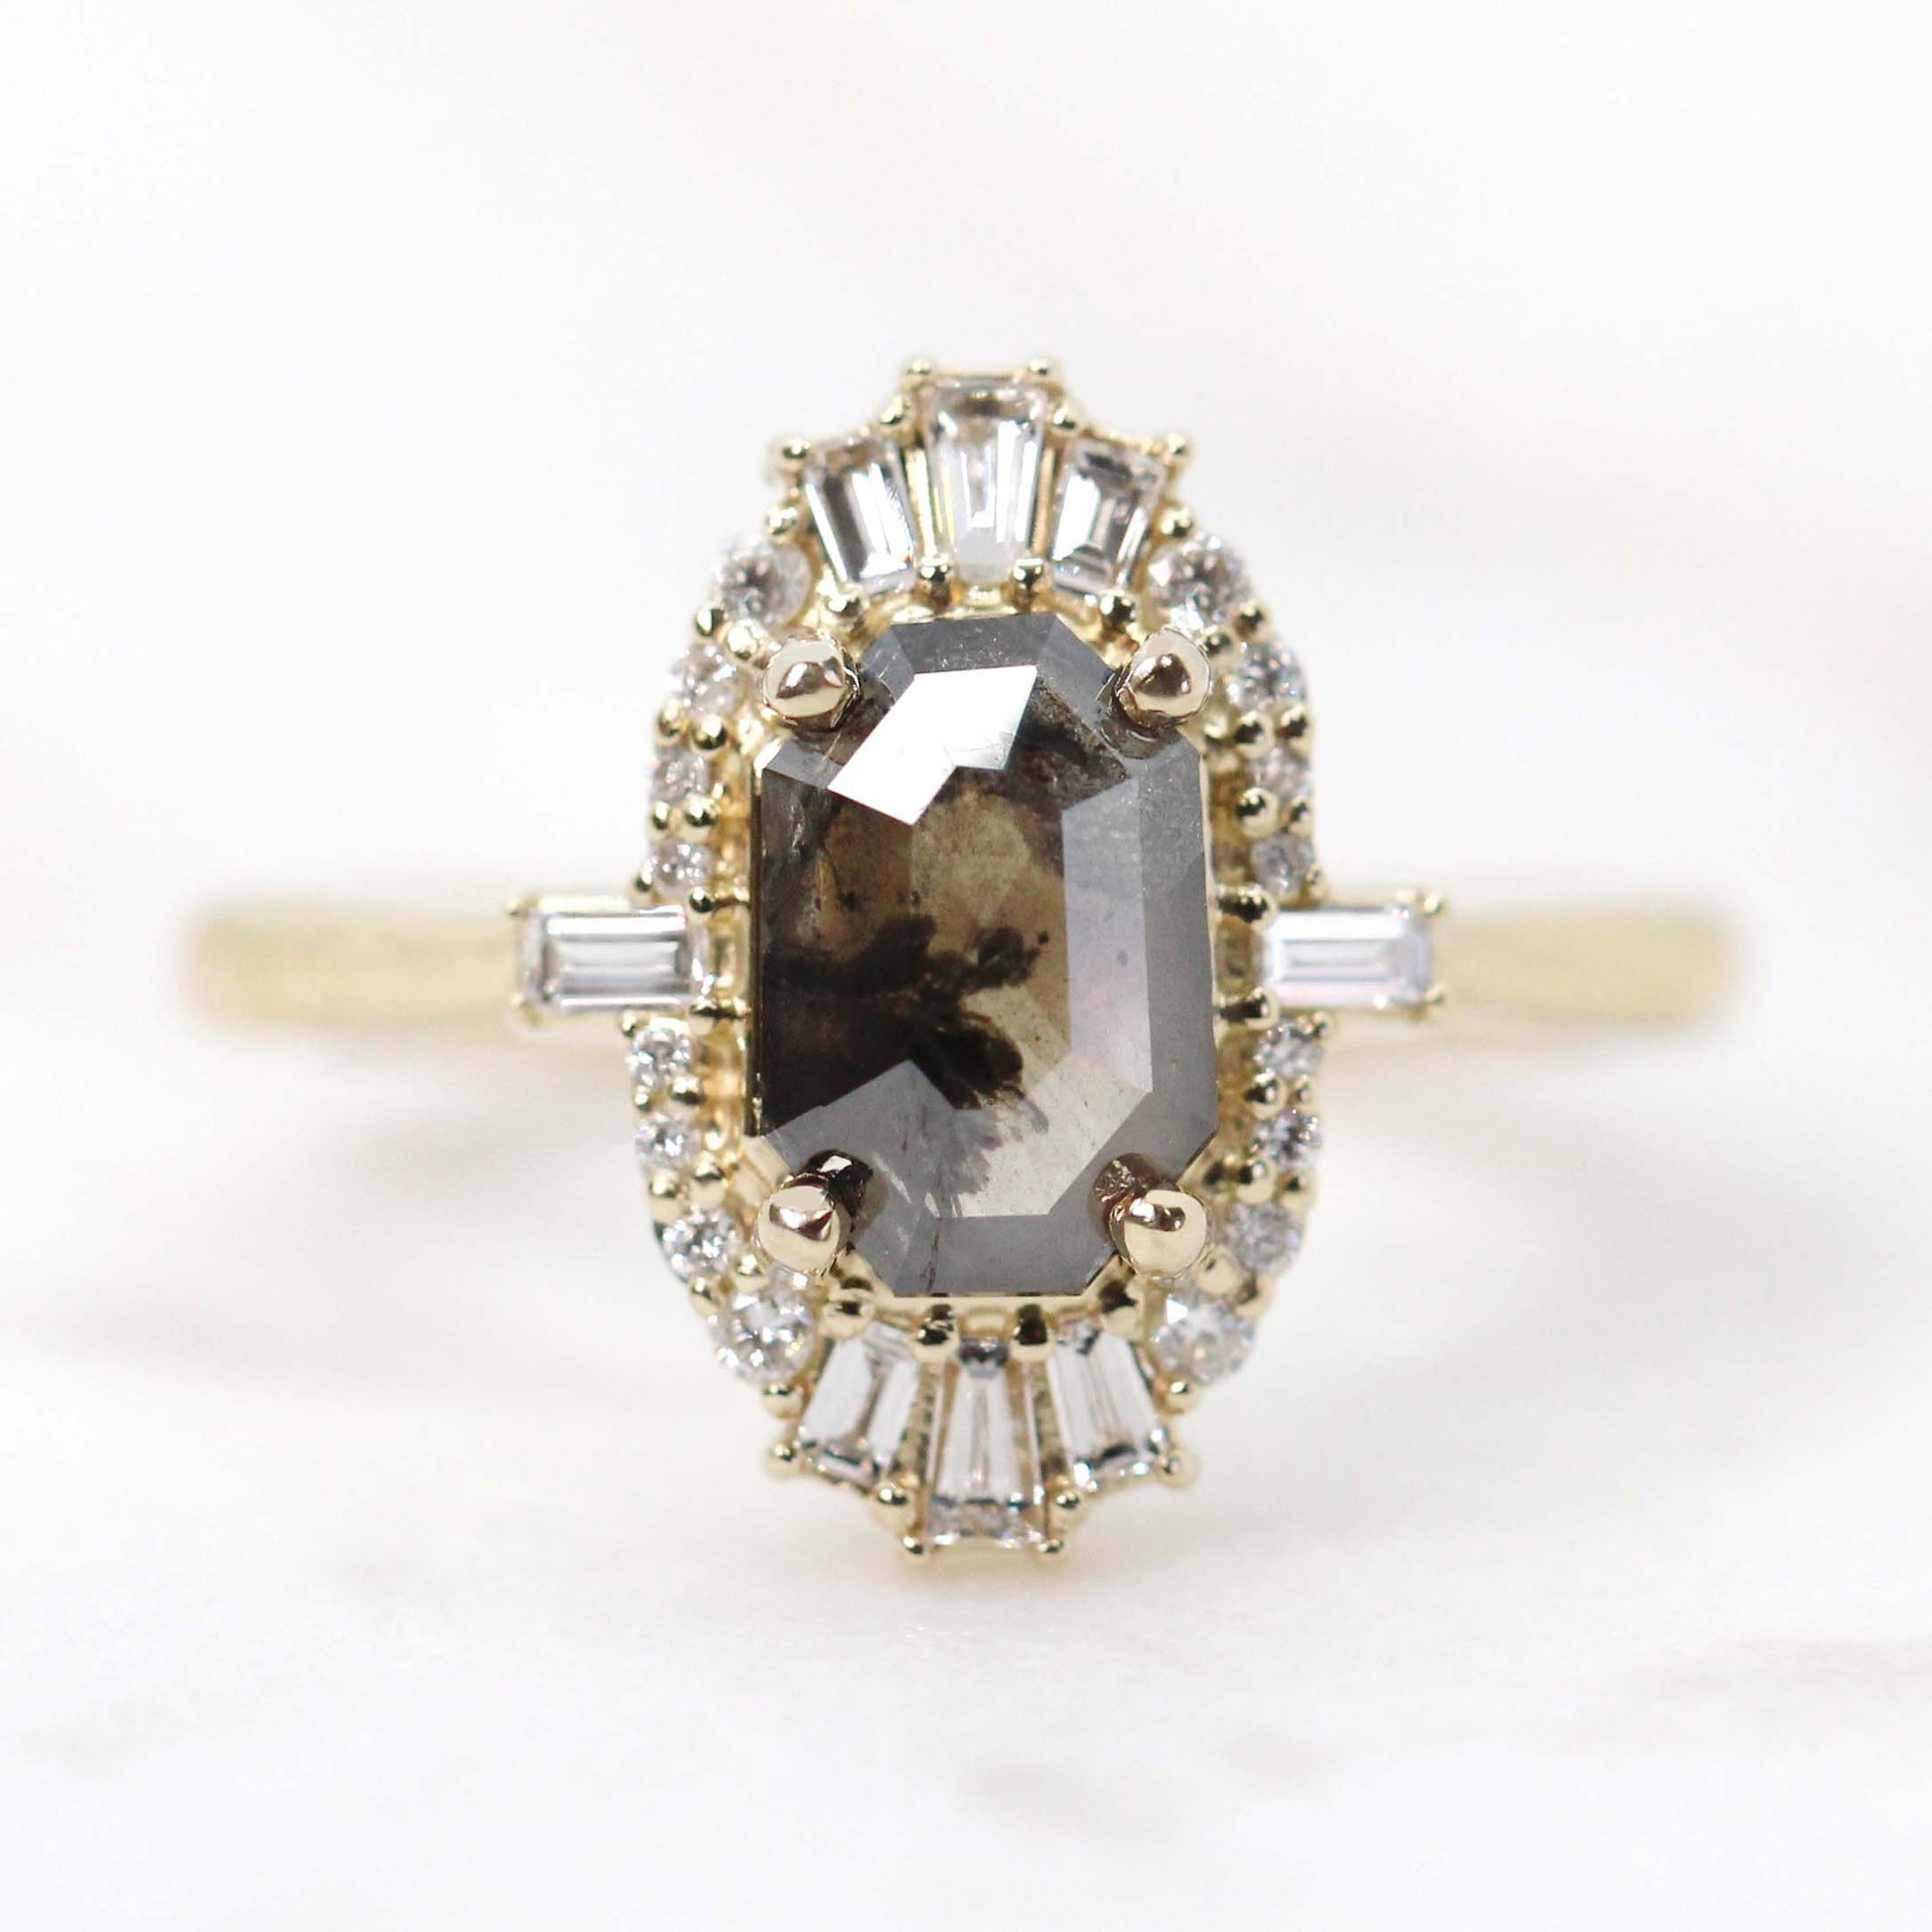 Ophelia Setting - Midwinter Co. Alternative Bridal Rings and Modern Fine Jewelry